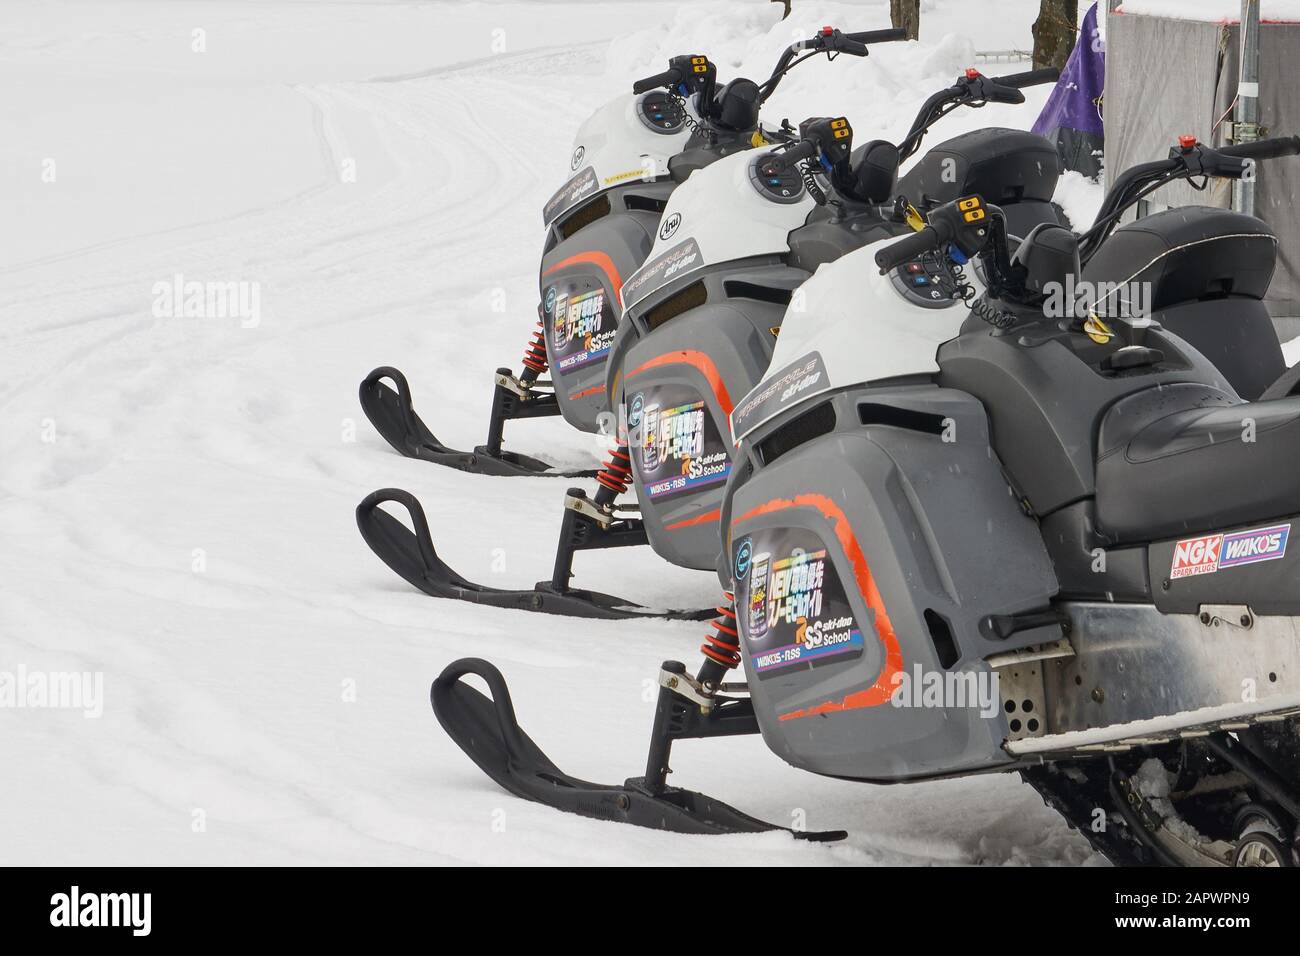 Three snowmobiles (snow machine, motor sled, motor sledge, skimobile,  snowscooter, sled or Ski-Doo) lined up on snow in Japan Stock Photo - Alamy